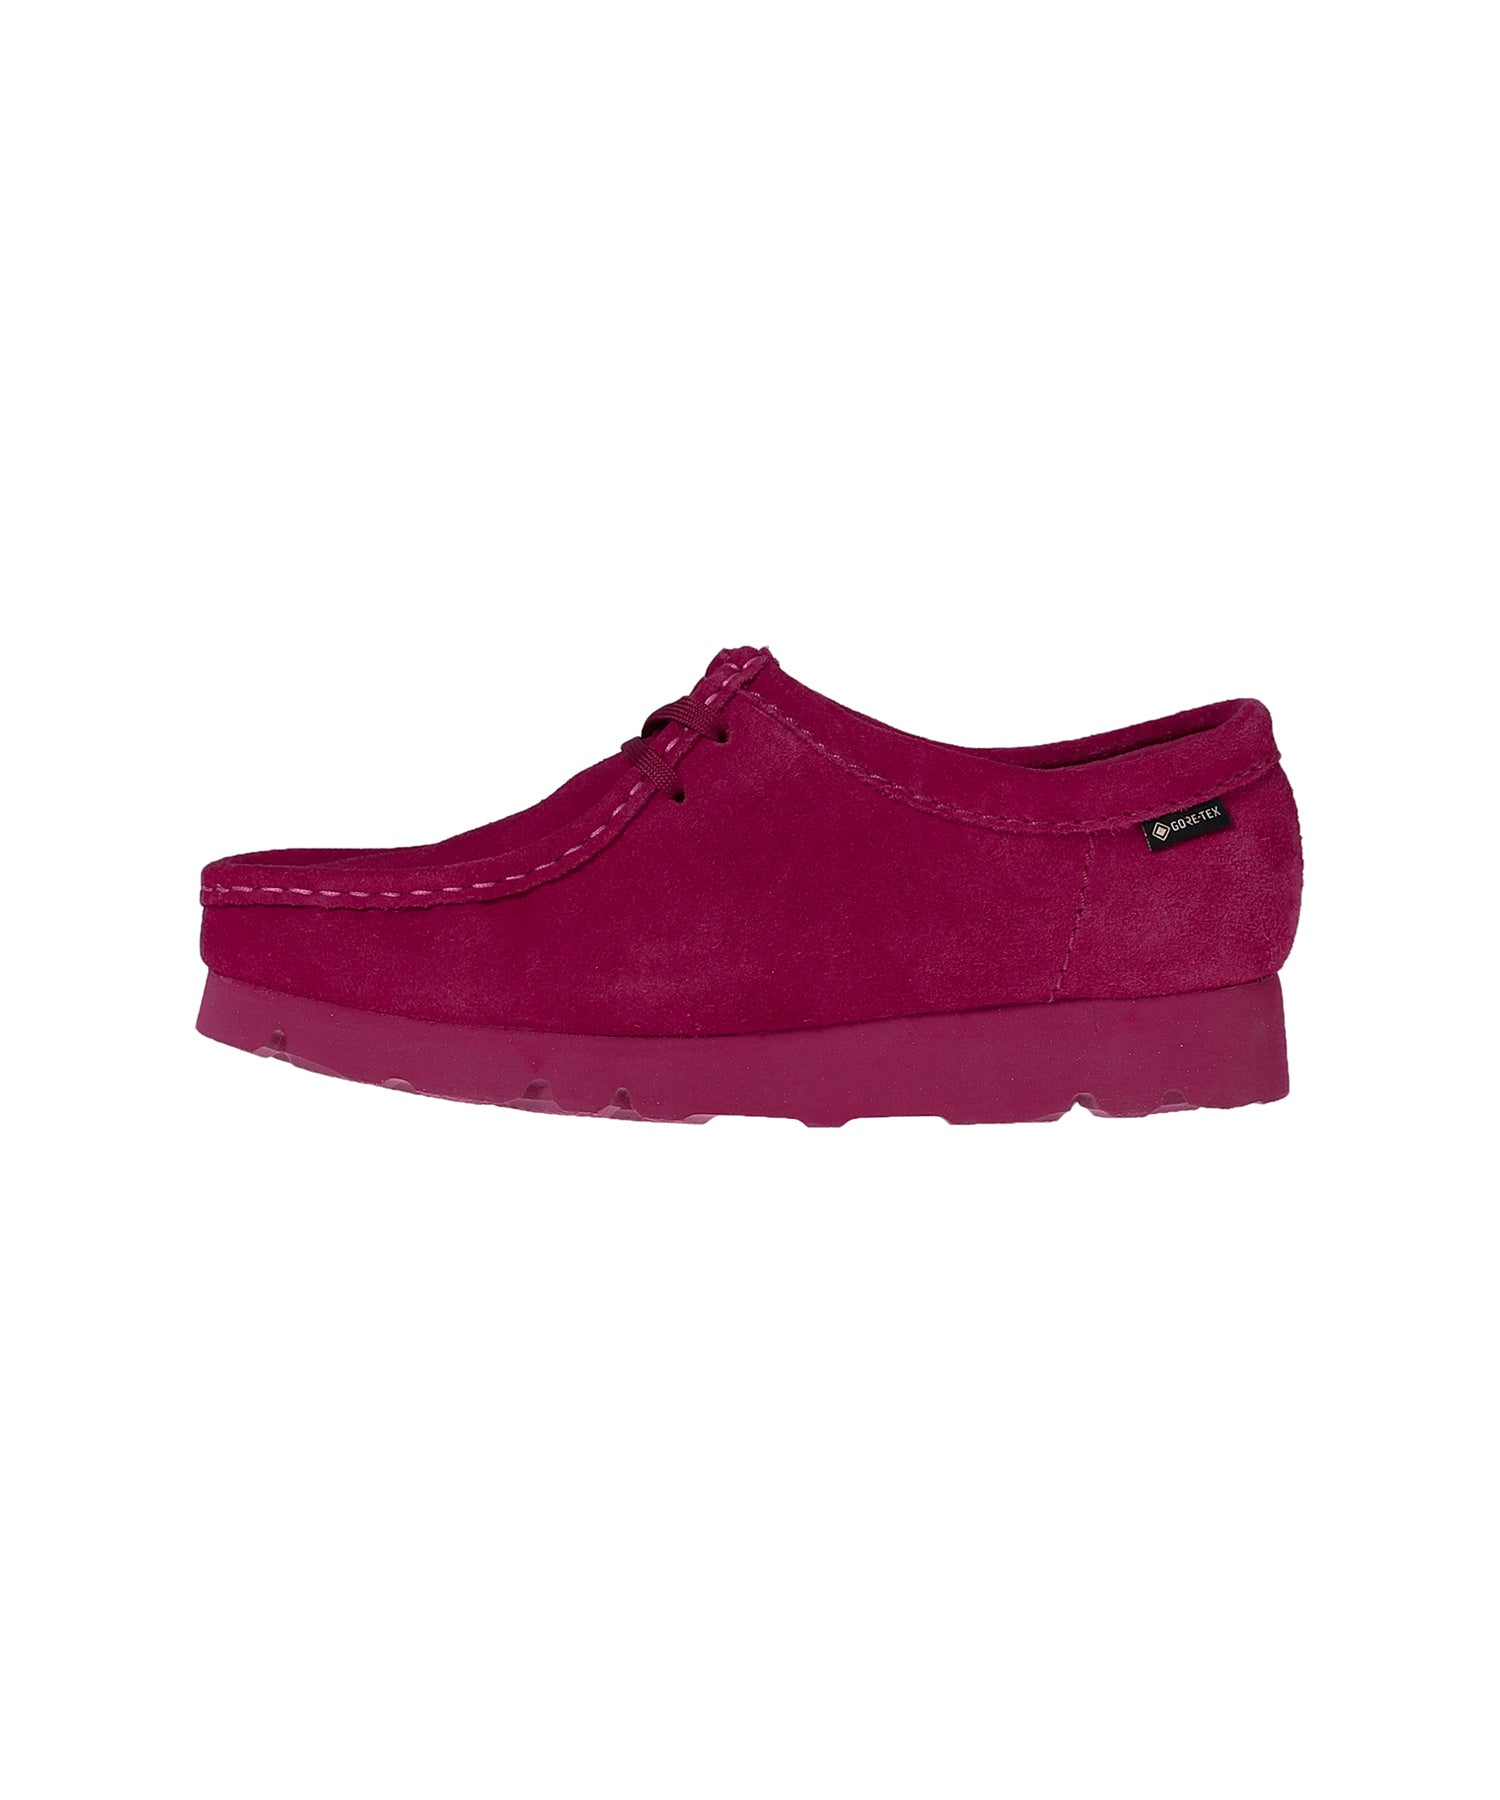 Wallabee GTX Berry Suede - Clarks (クラークス) - shoes (シューズ ...